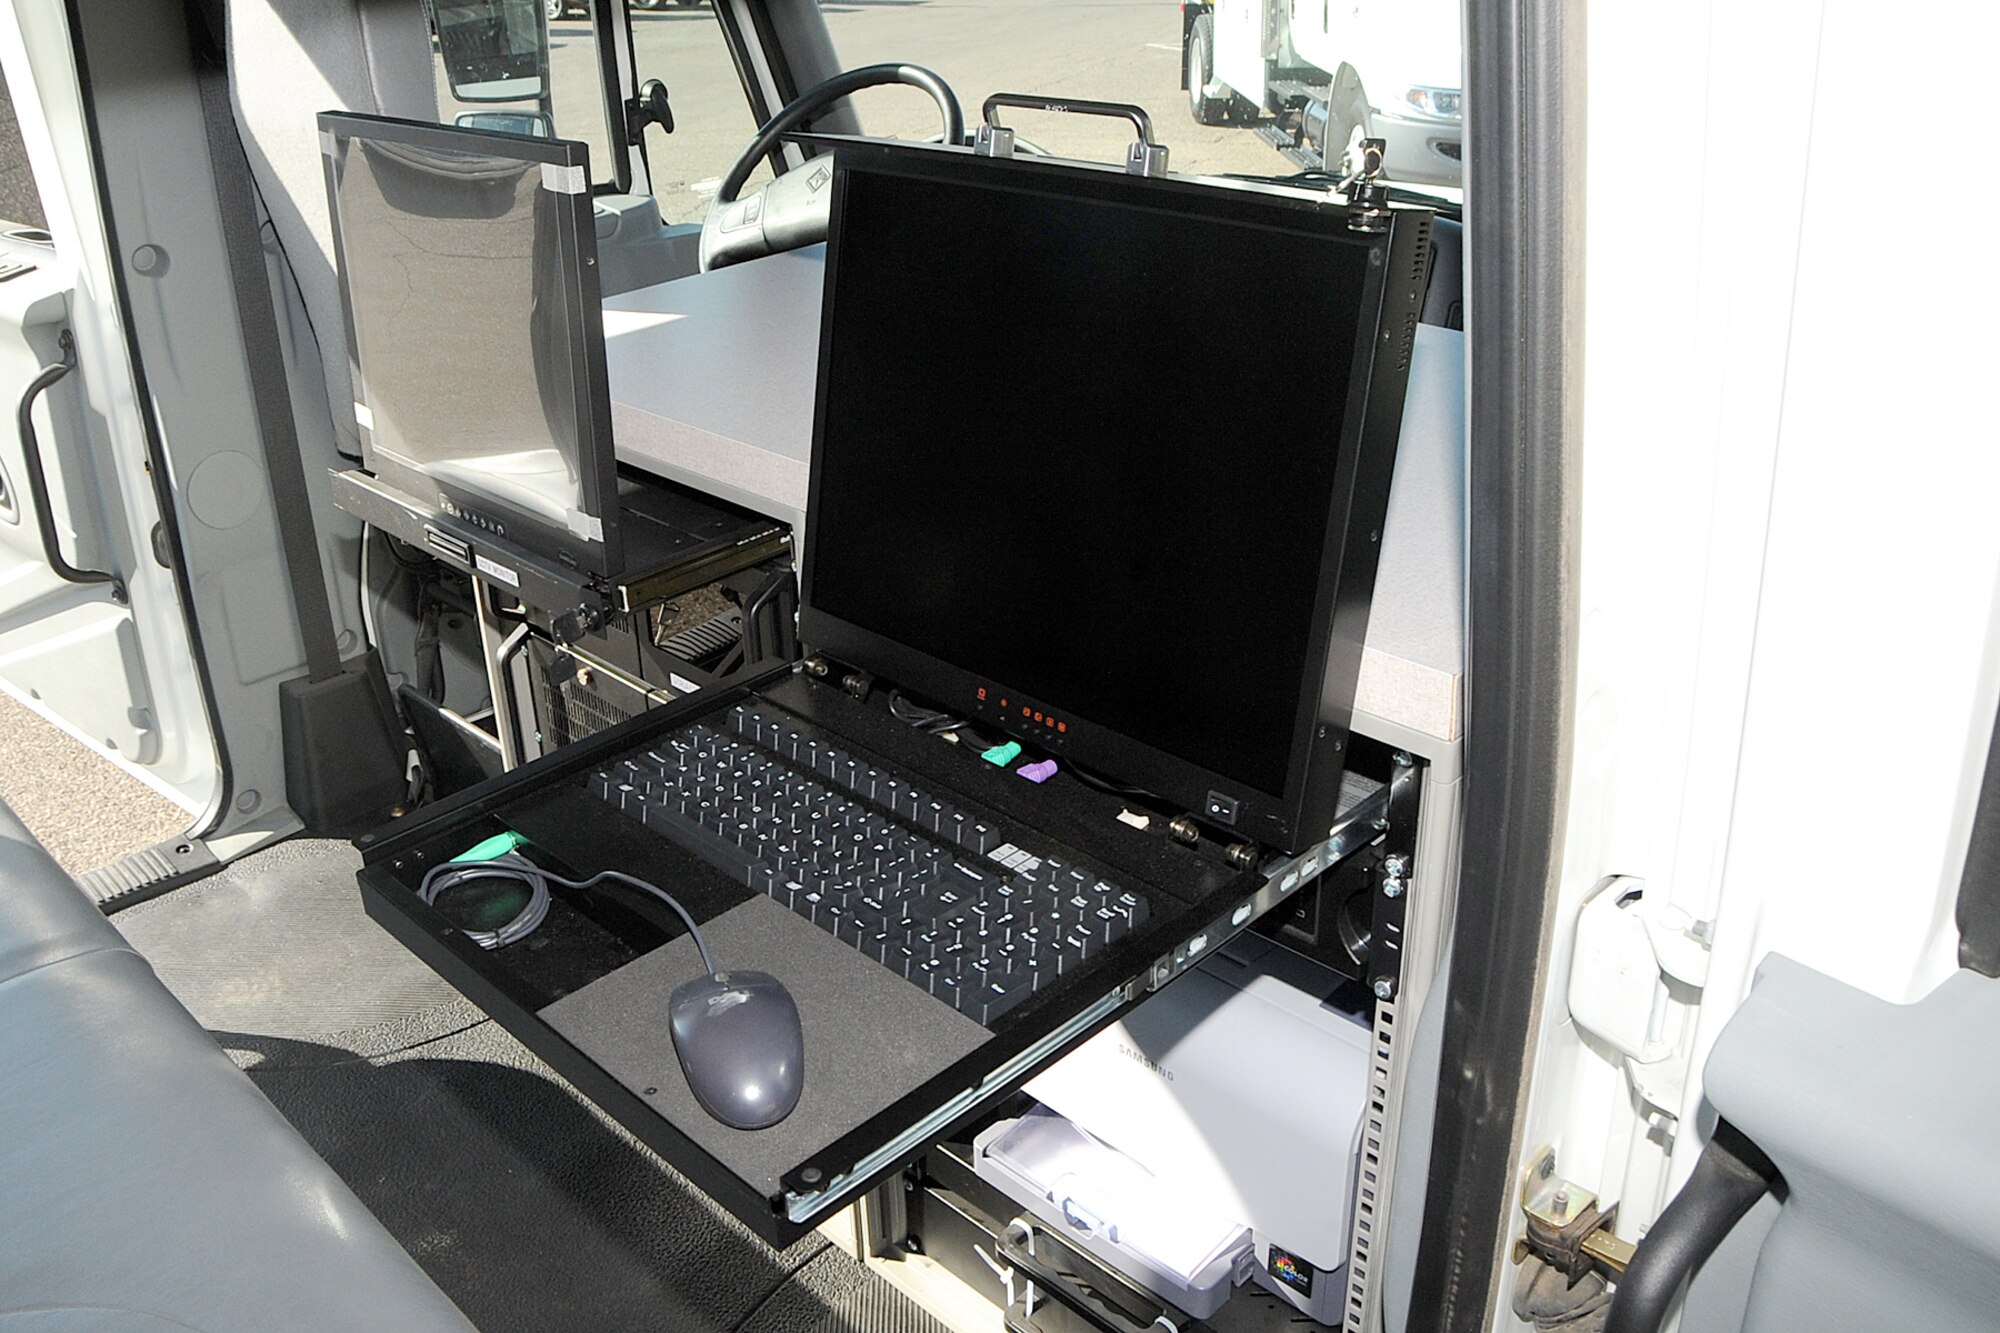 Pictured is the Rapiscan Gamma Ray Detection Mobile imaging system where an operator can view an x-ray of vehicles from within the cab of the truck. Two Gamma Ray Detections Systems were donated by Rapiscan Systems Inc. to Holloman Air Force Base, N.M., October 22. (U.S. Air Force photo/Tech Sgt. Chris Flahive)